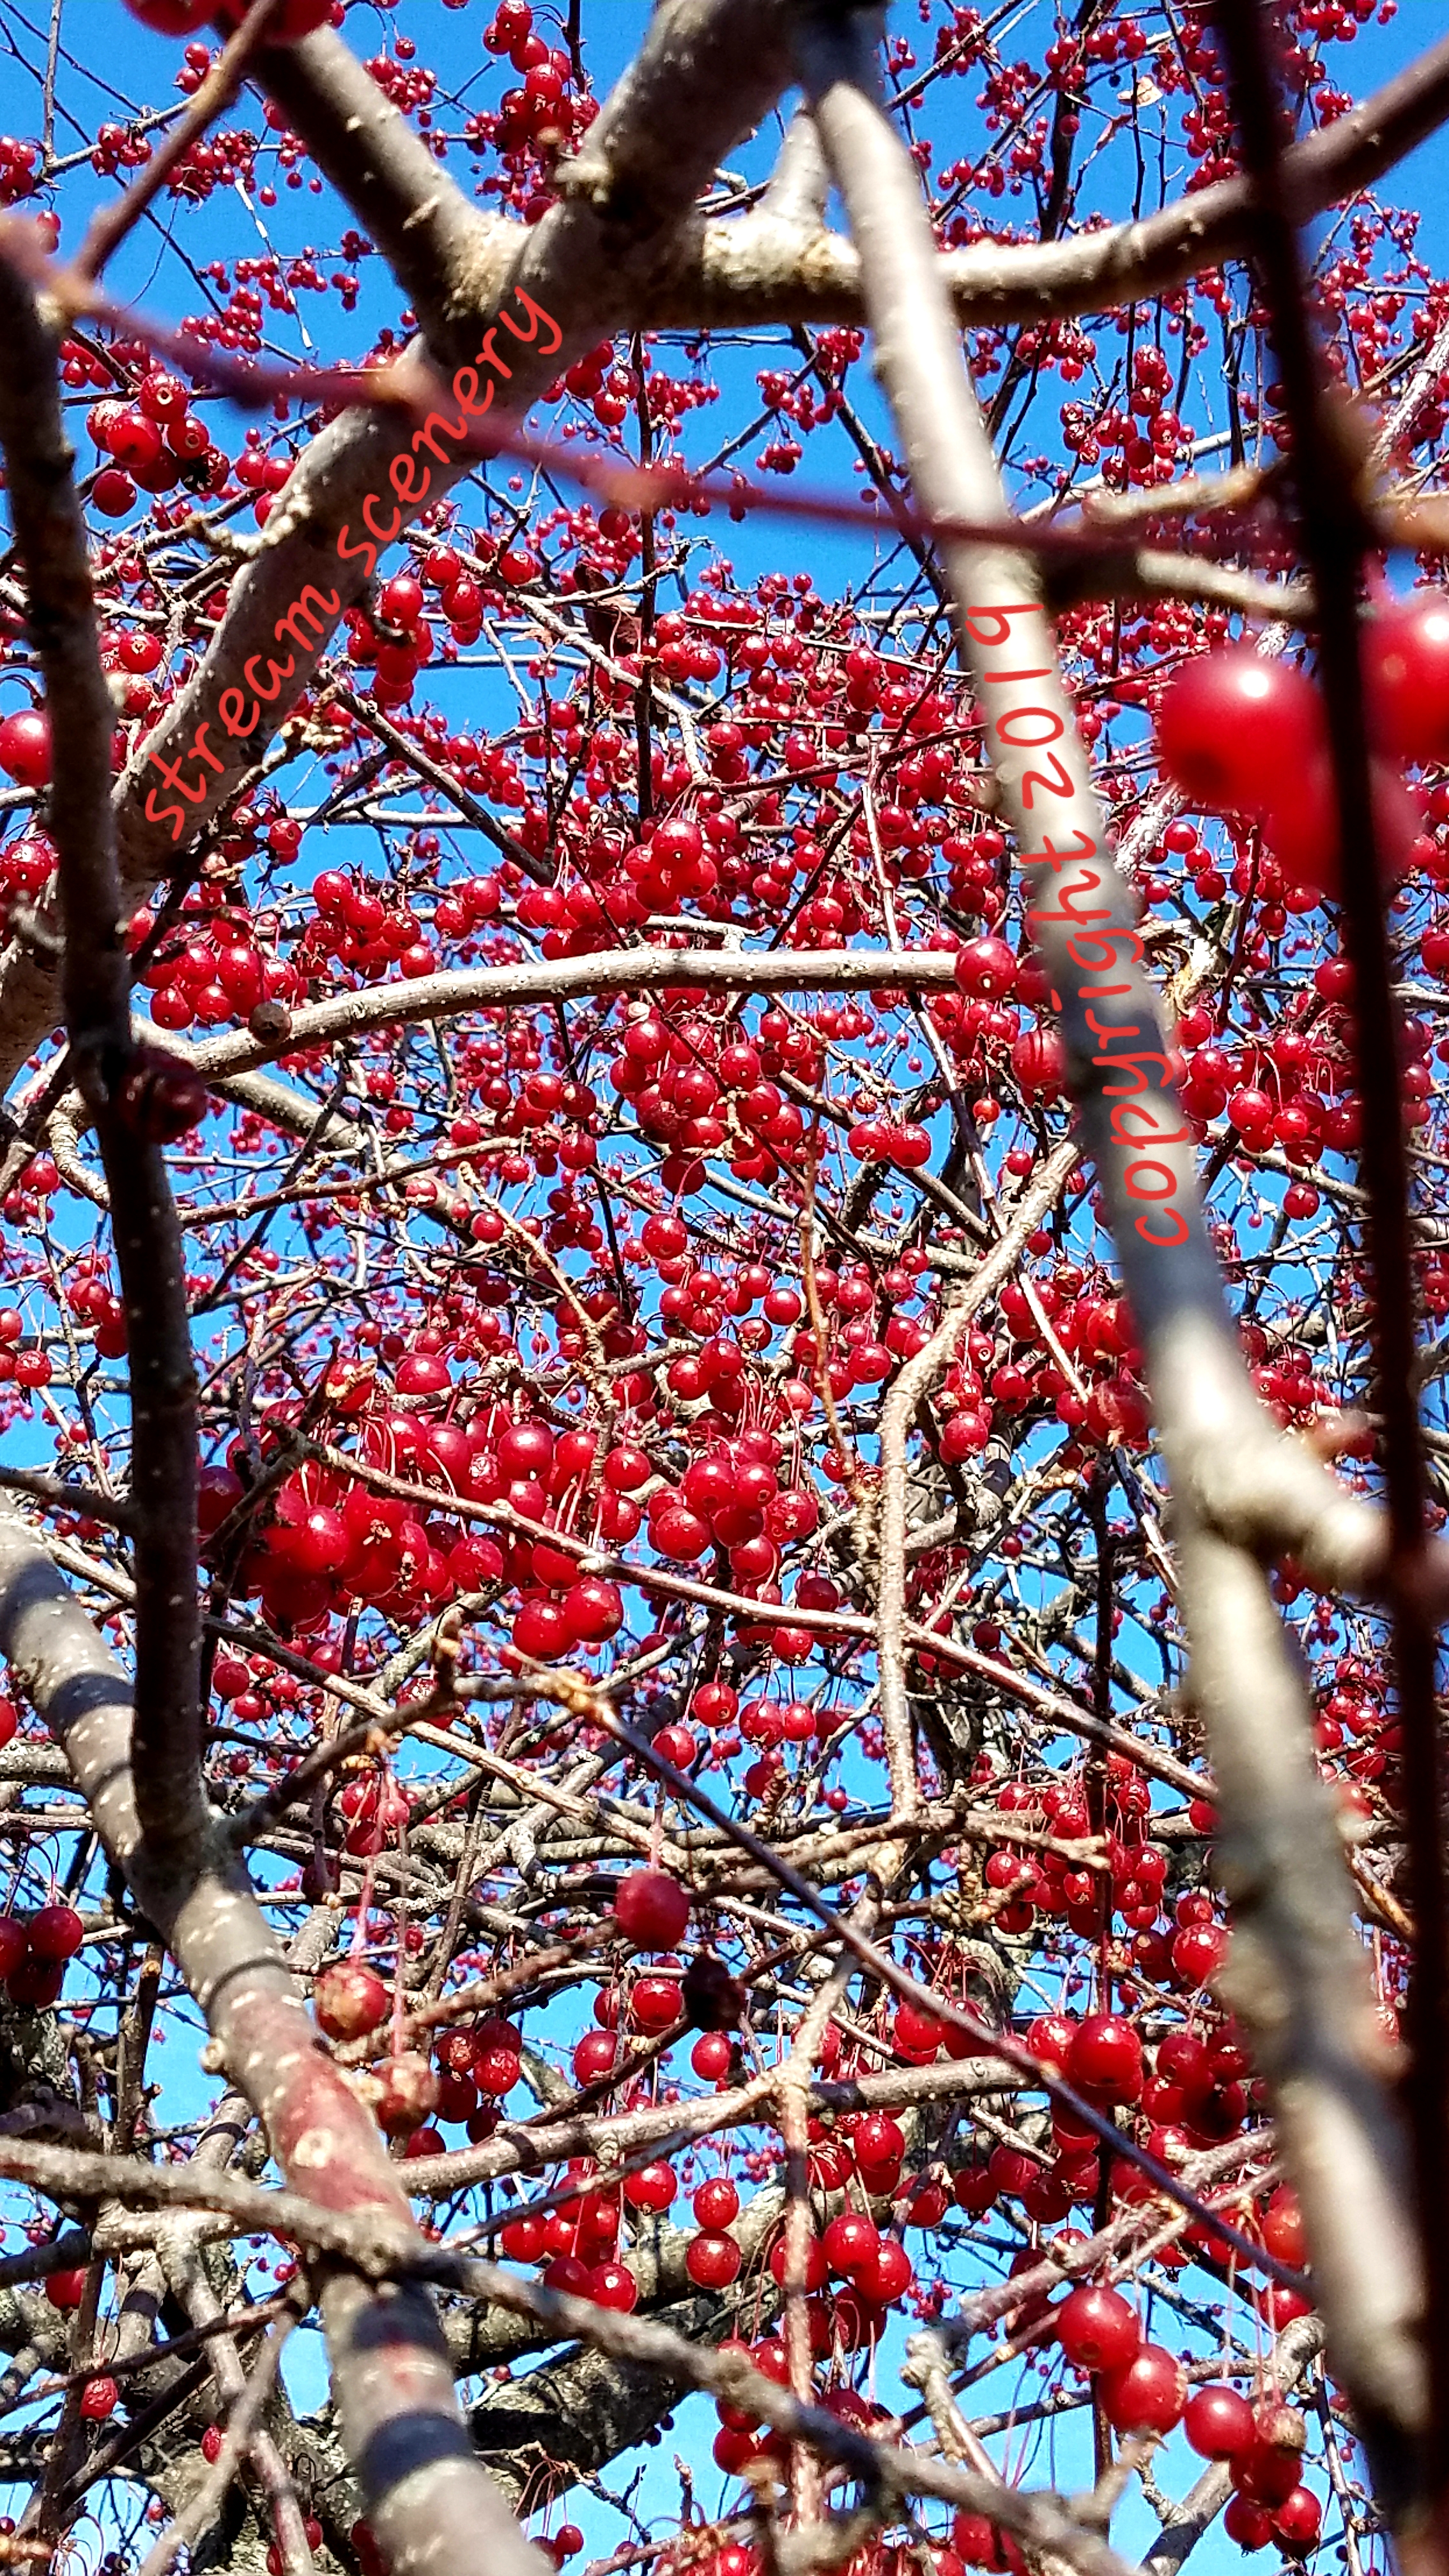 #BTAUT "AUTUMN BERRIES" NATURE AND ARBOR PRINTS BY STREAM SCENERY